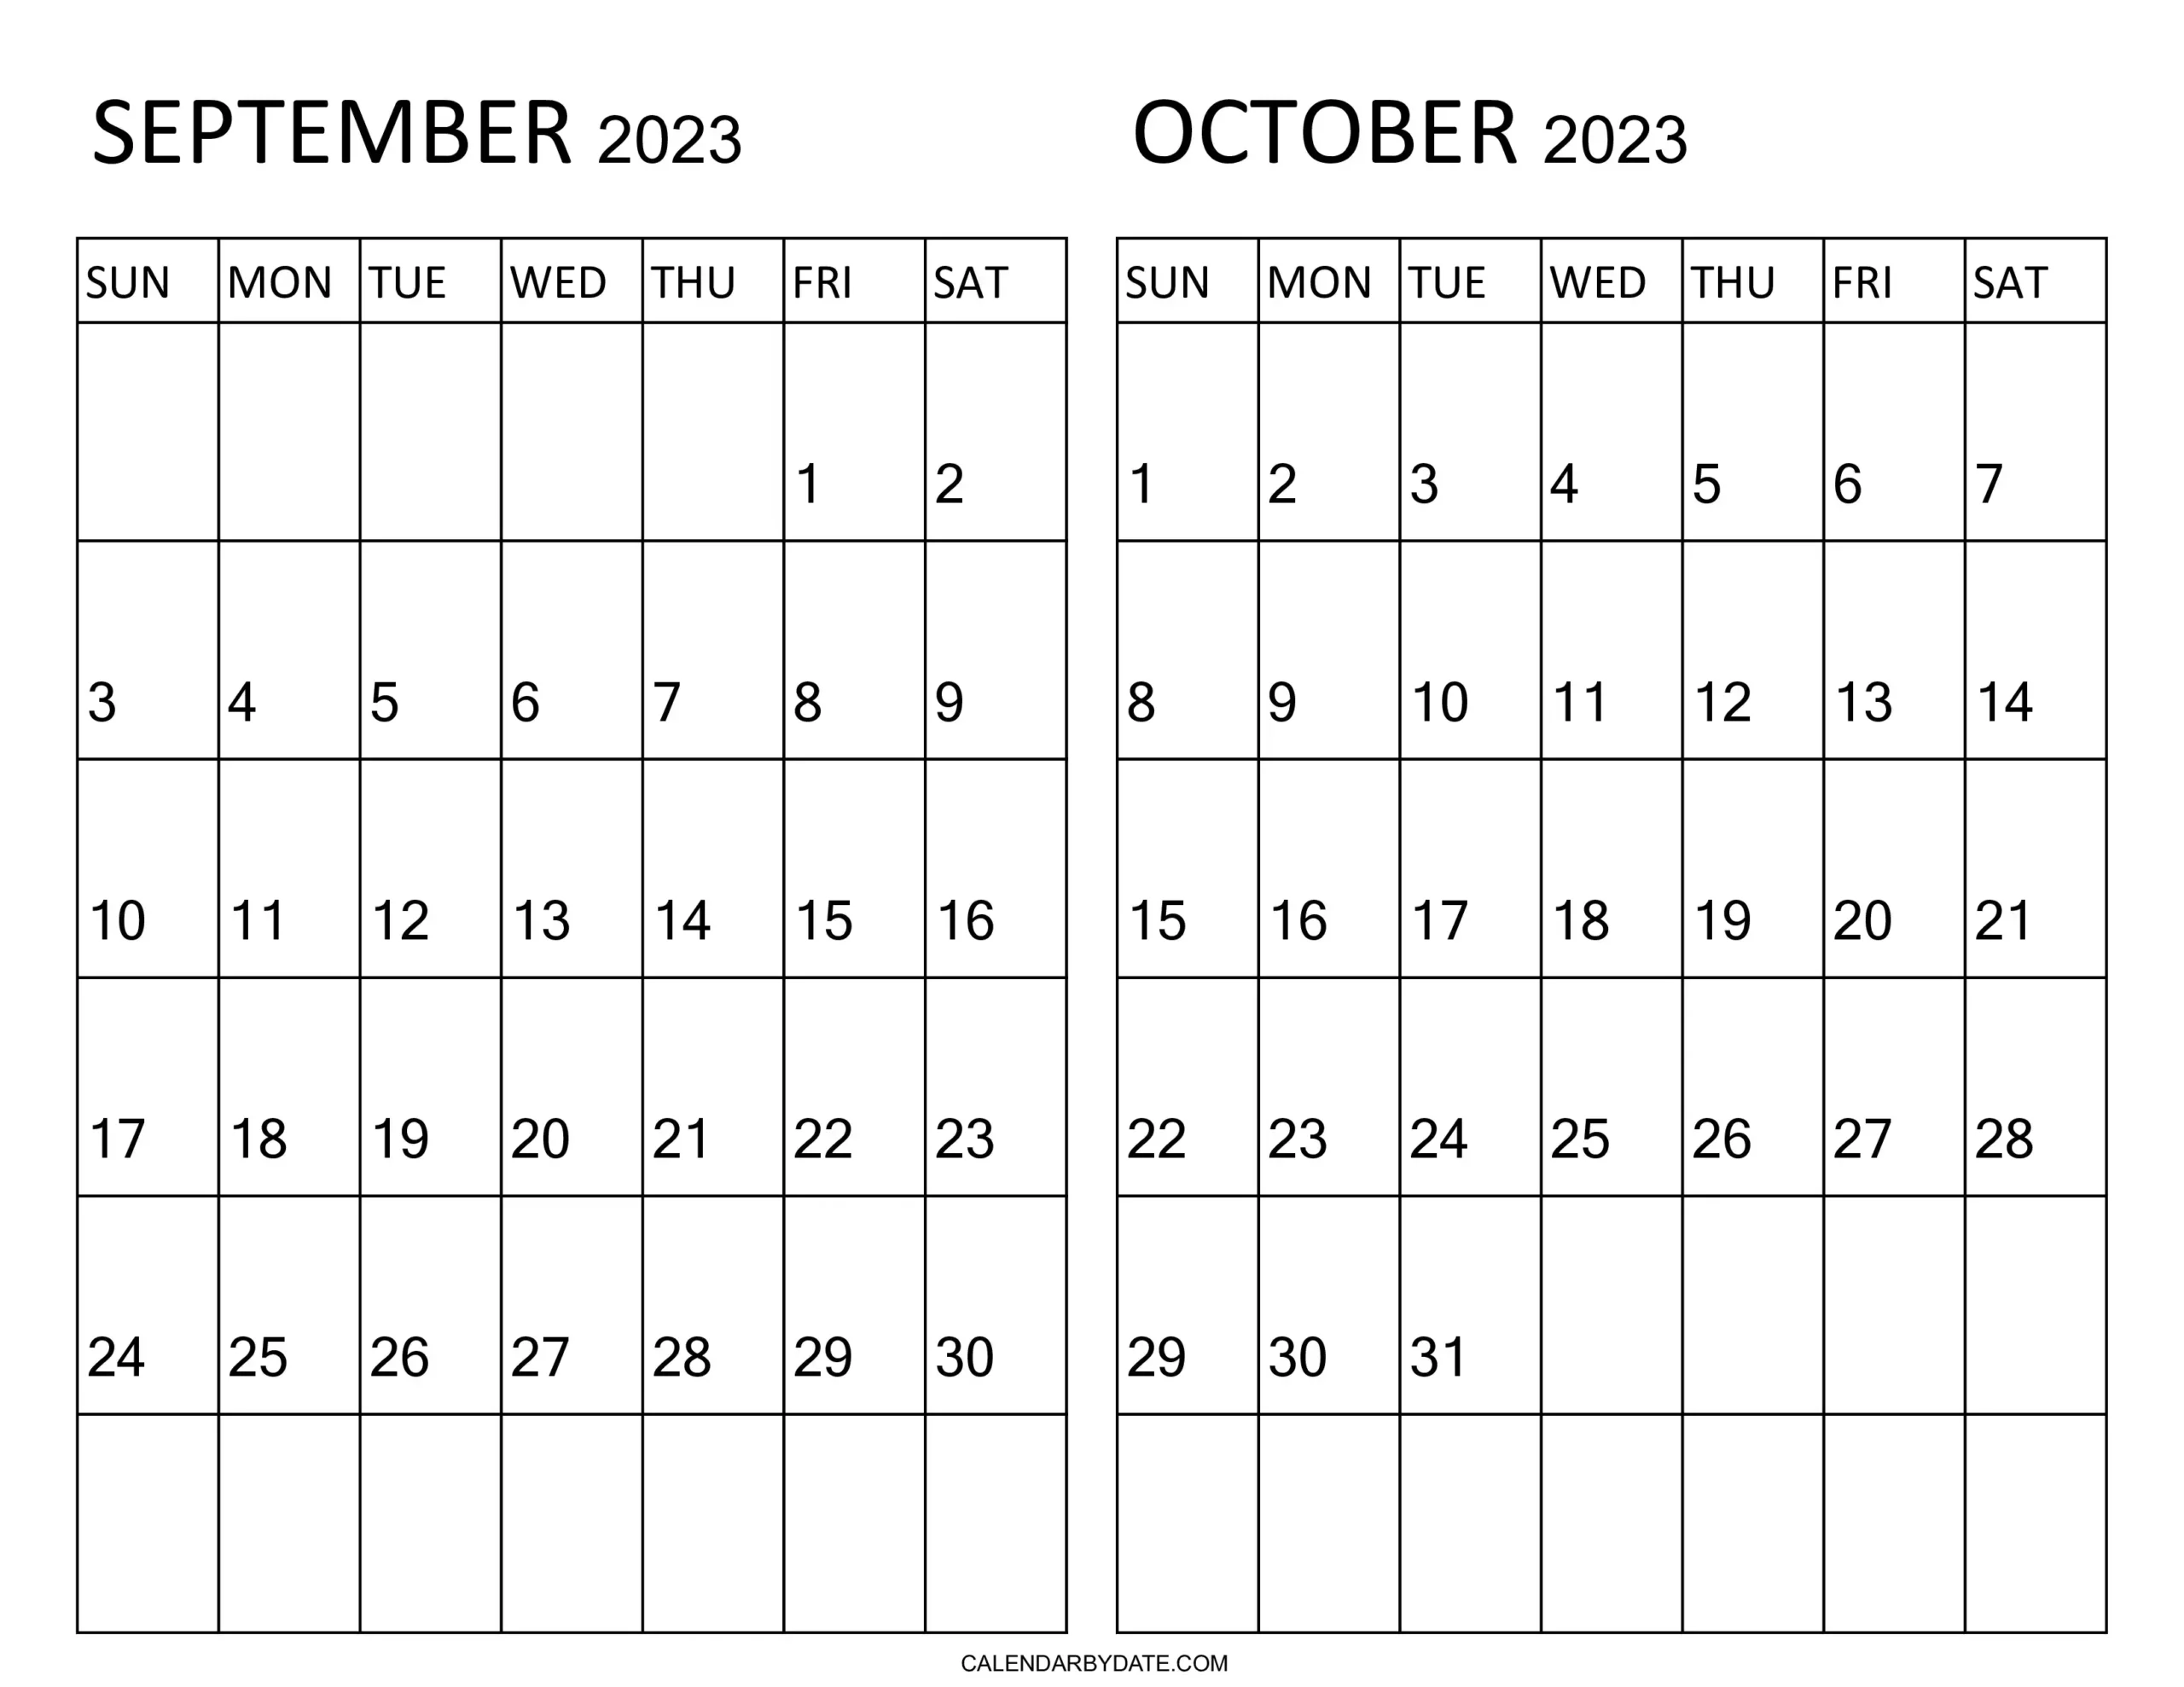 Calendar for the months of September and October 2023, with weekdays starting on Sunday. For two-month planning, rows and columns are constructed to build a grid.